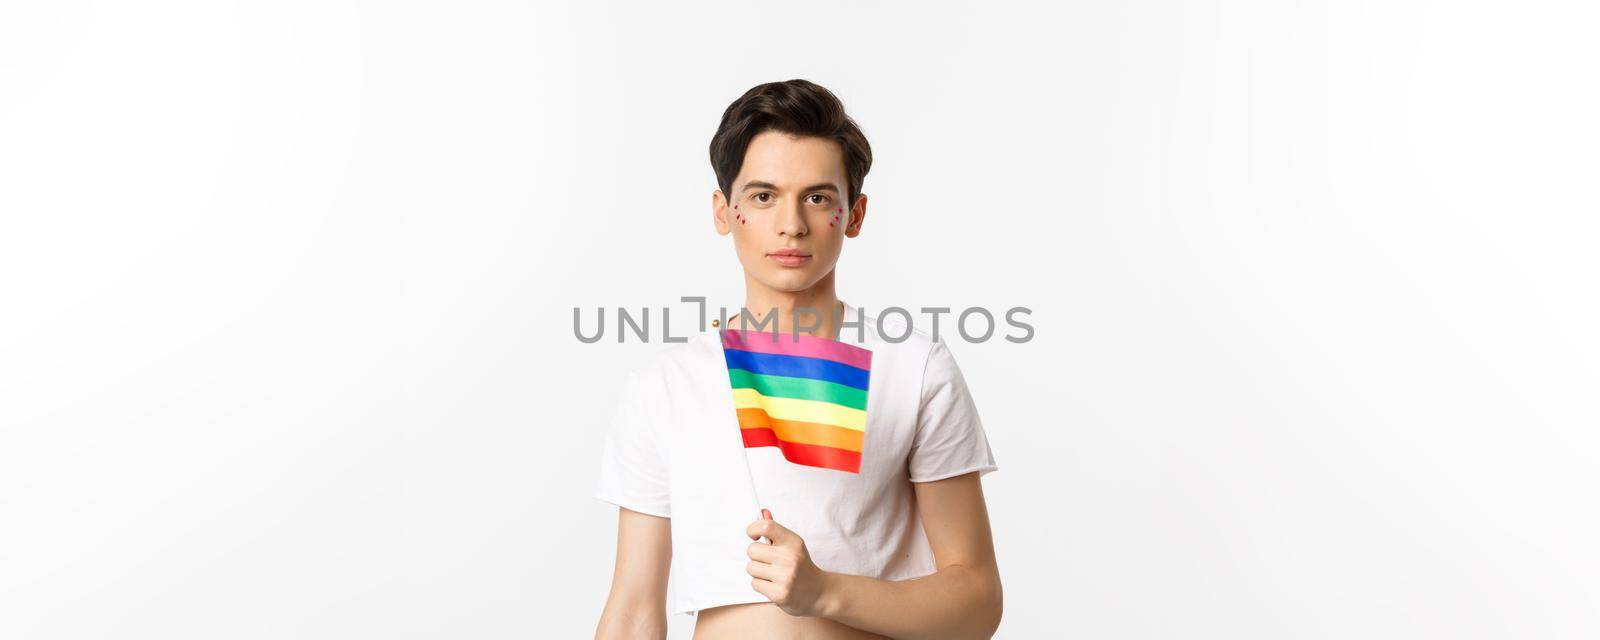 Pride and lgbtq concept. Waist up shot of attractive anrogynous man holding rainbow flag, having glitter on face and looking at camera, standing over white background.